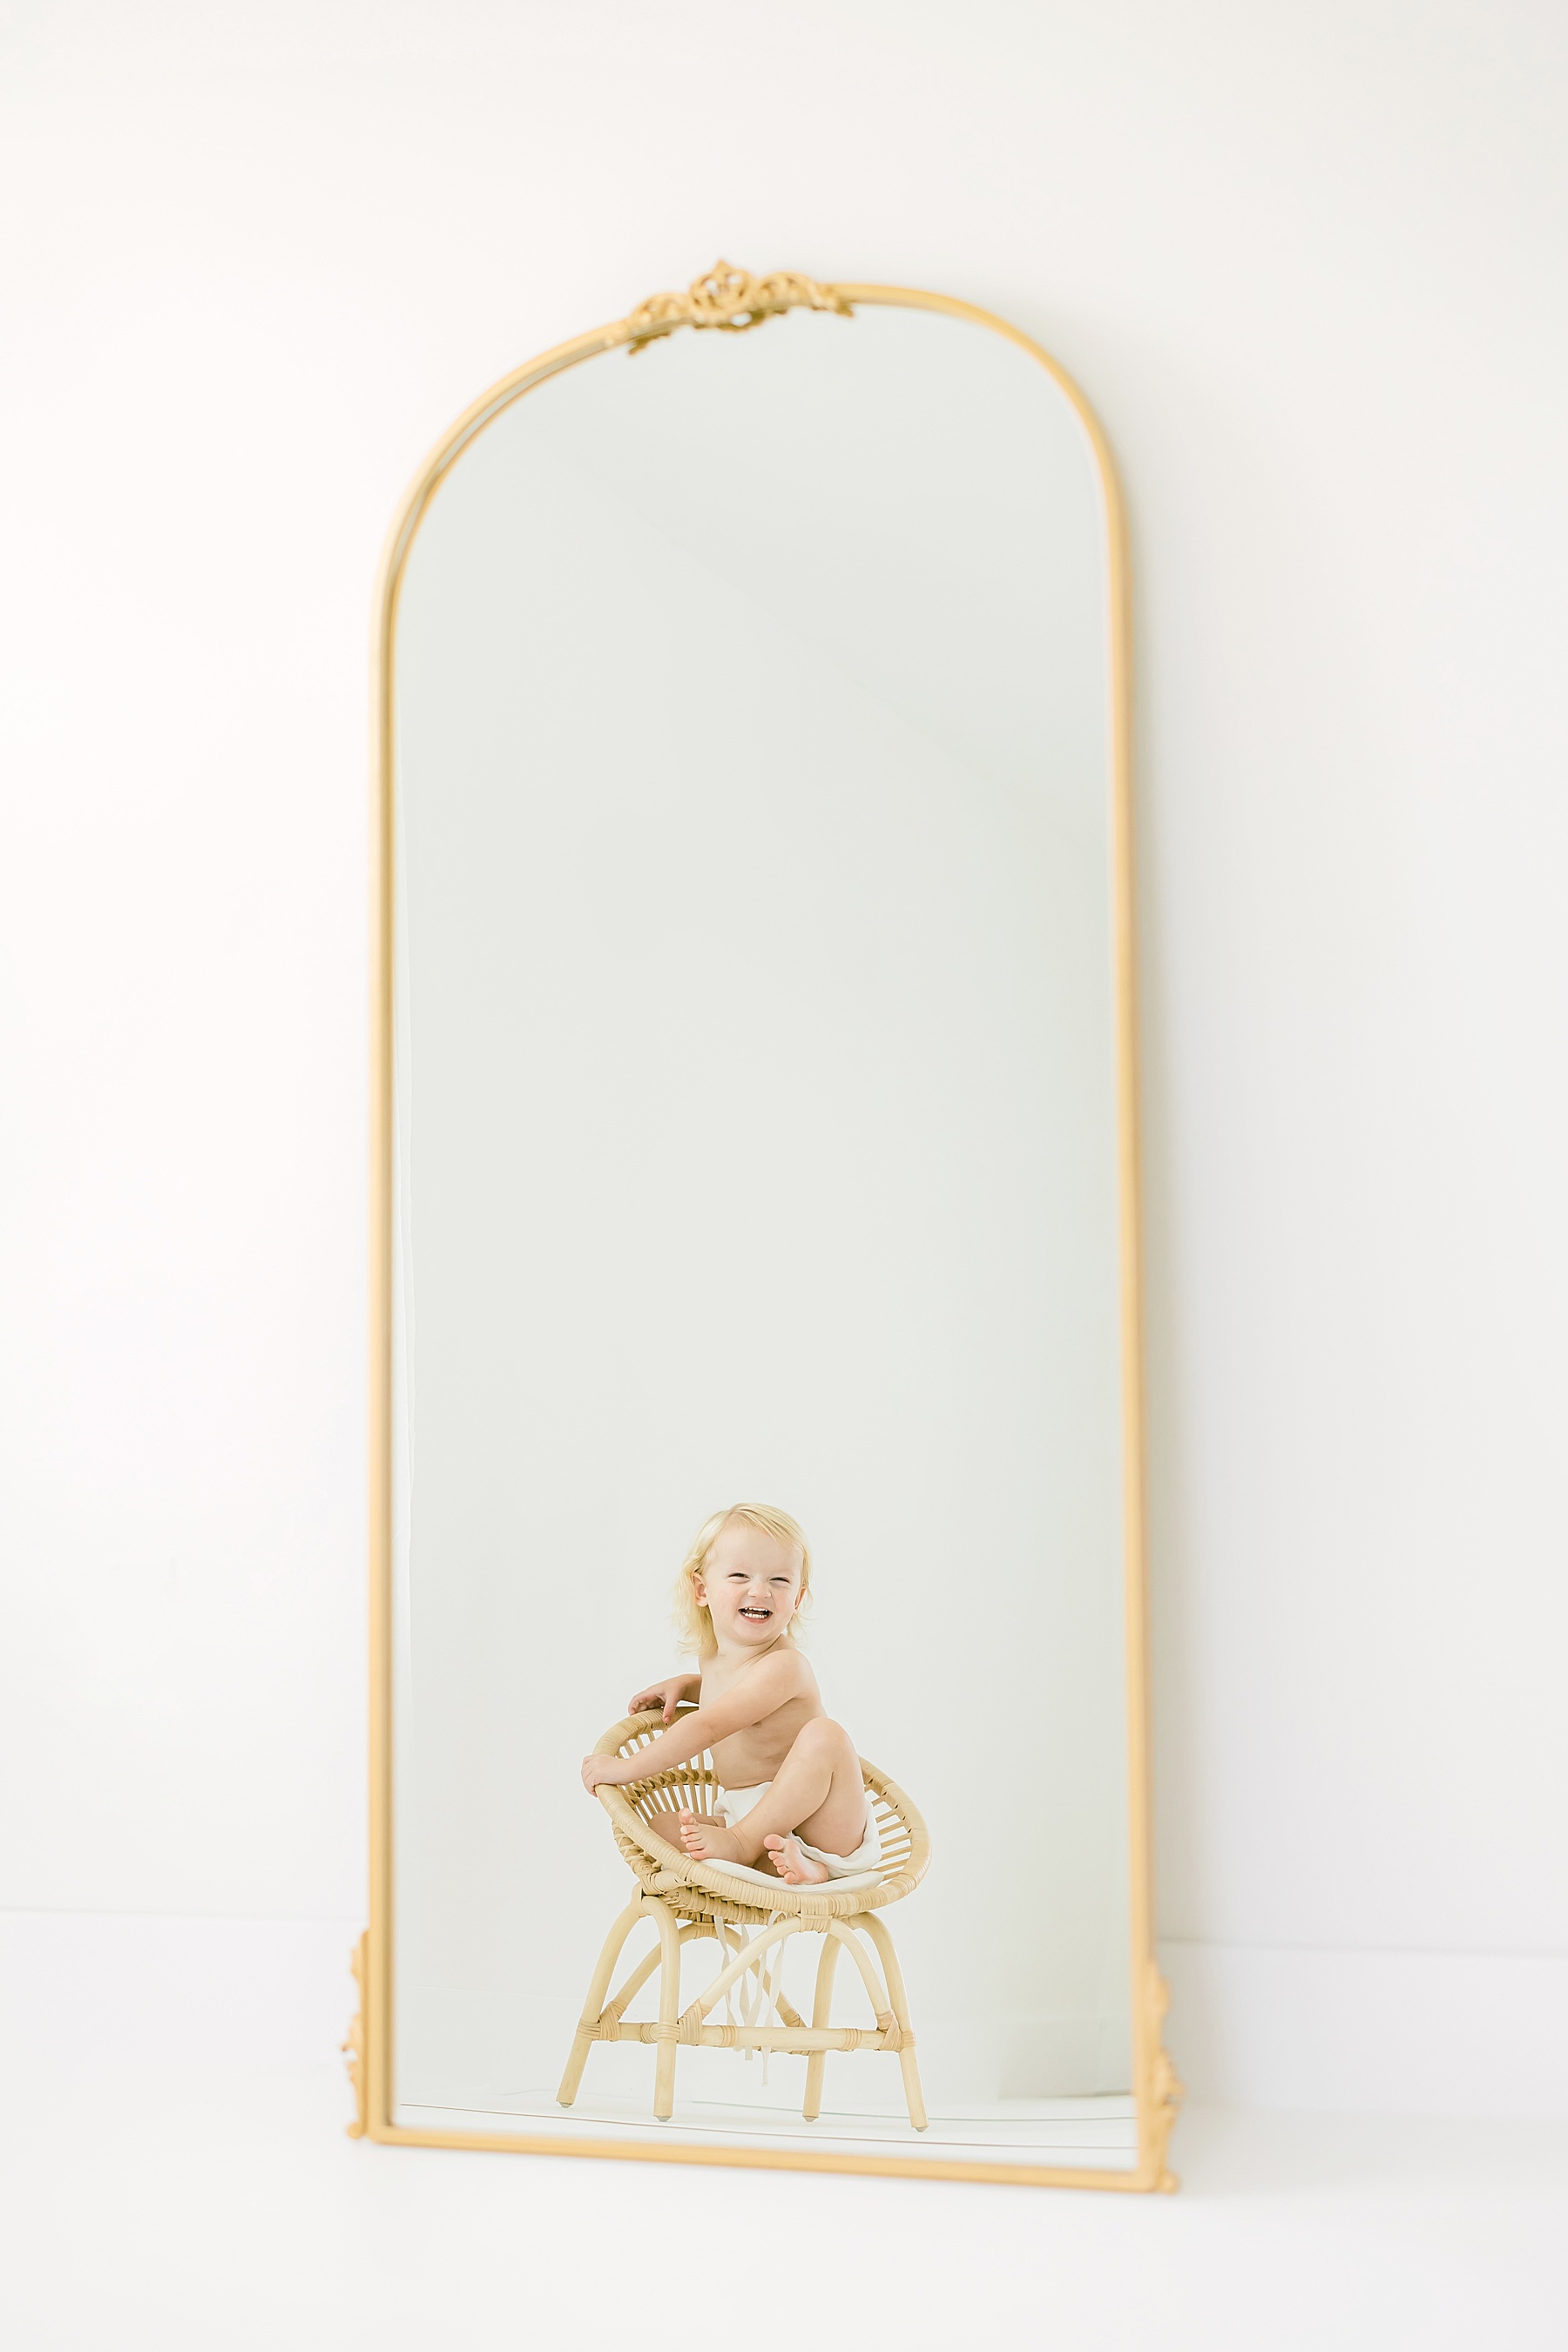 baby boy sitting in rattan chair in front of gold mirror